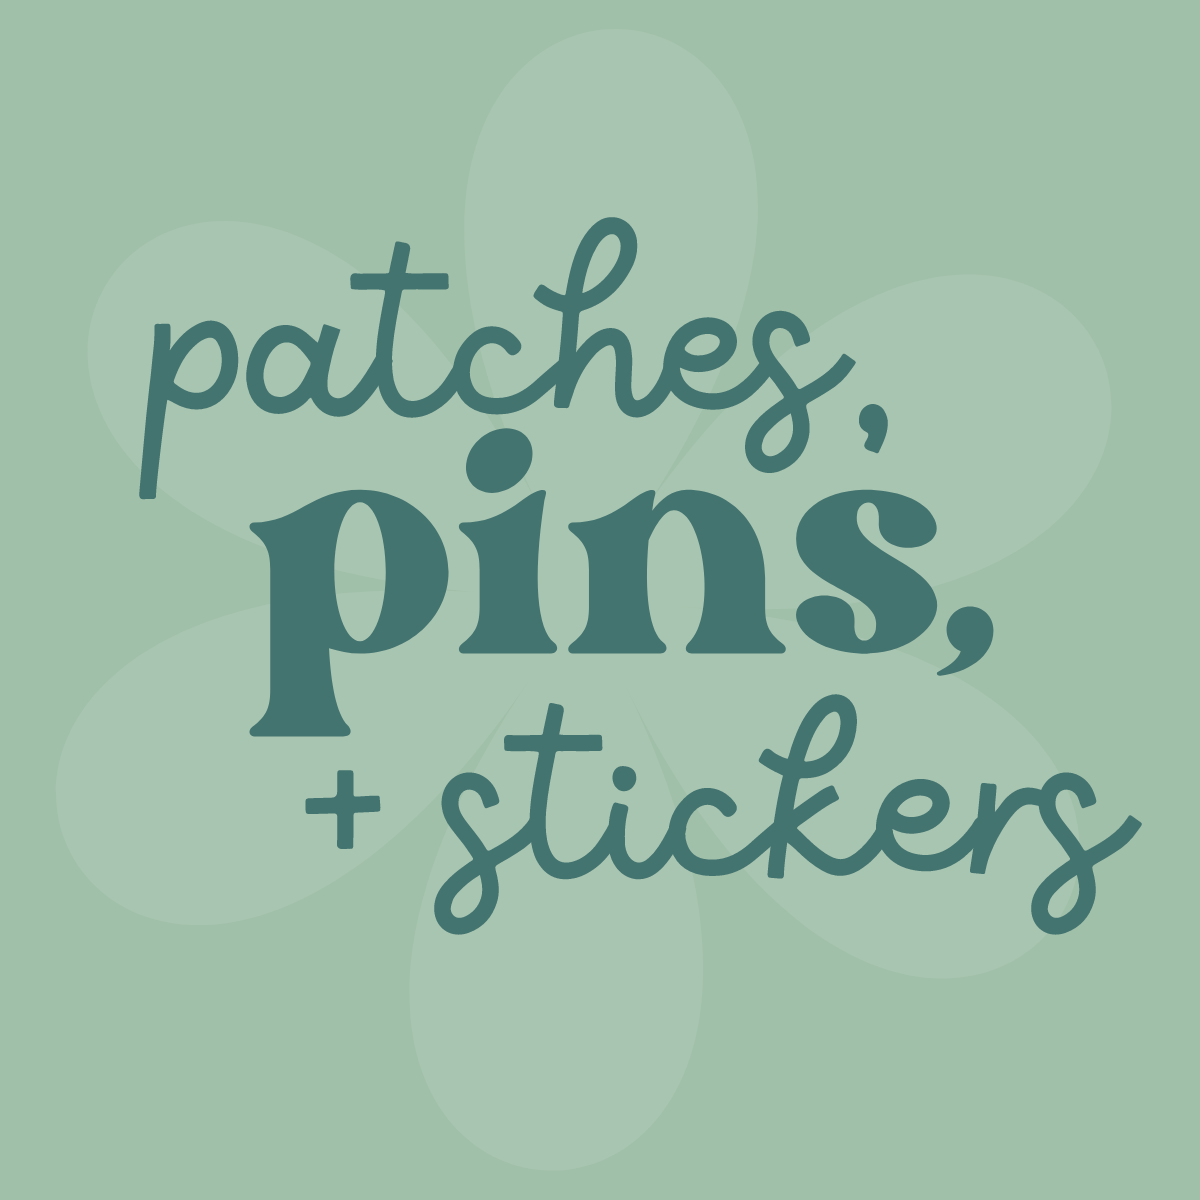 Patches, Pins, + Stickers